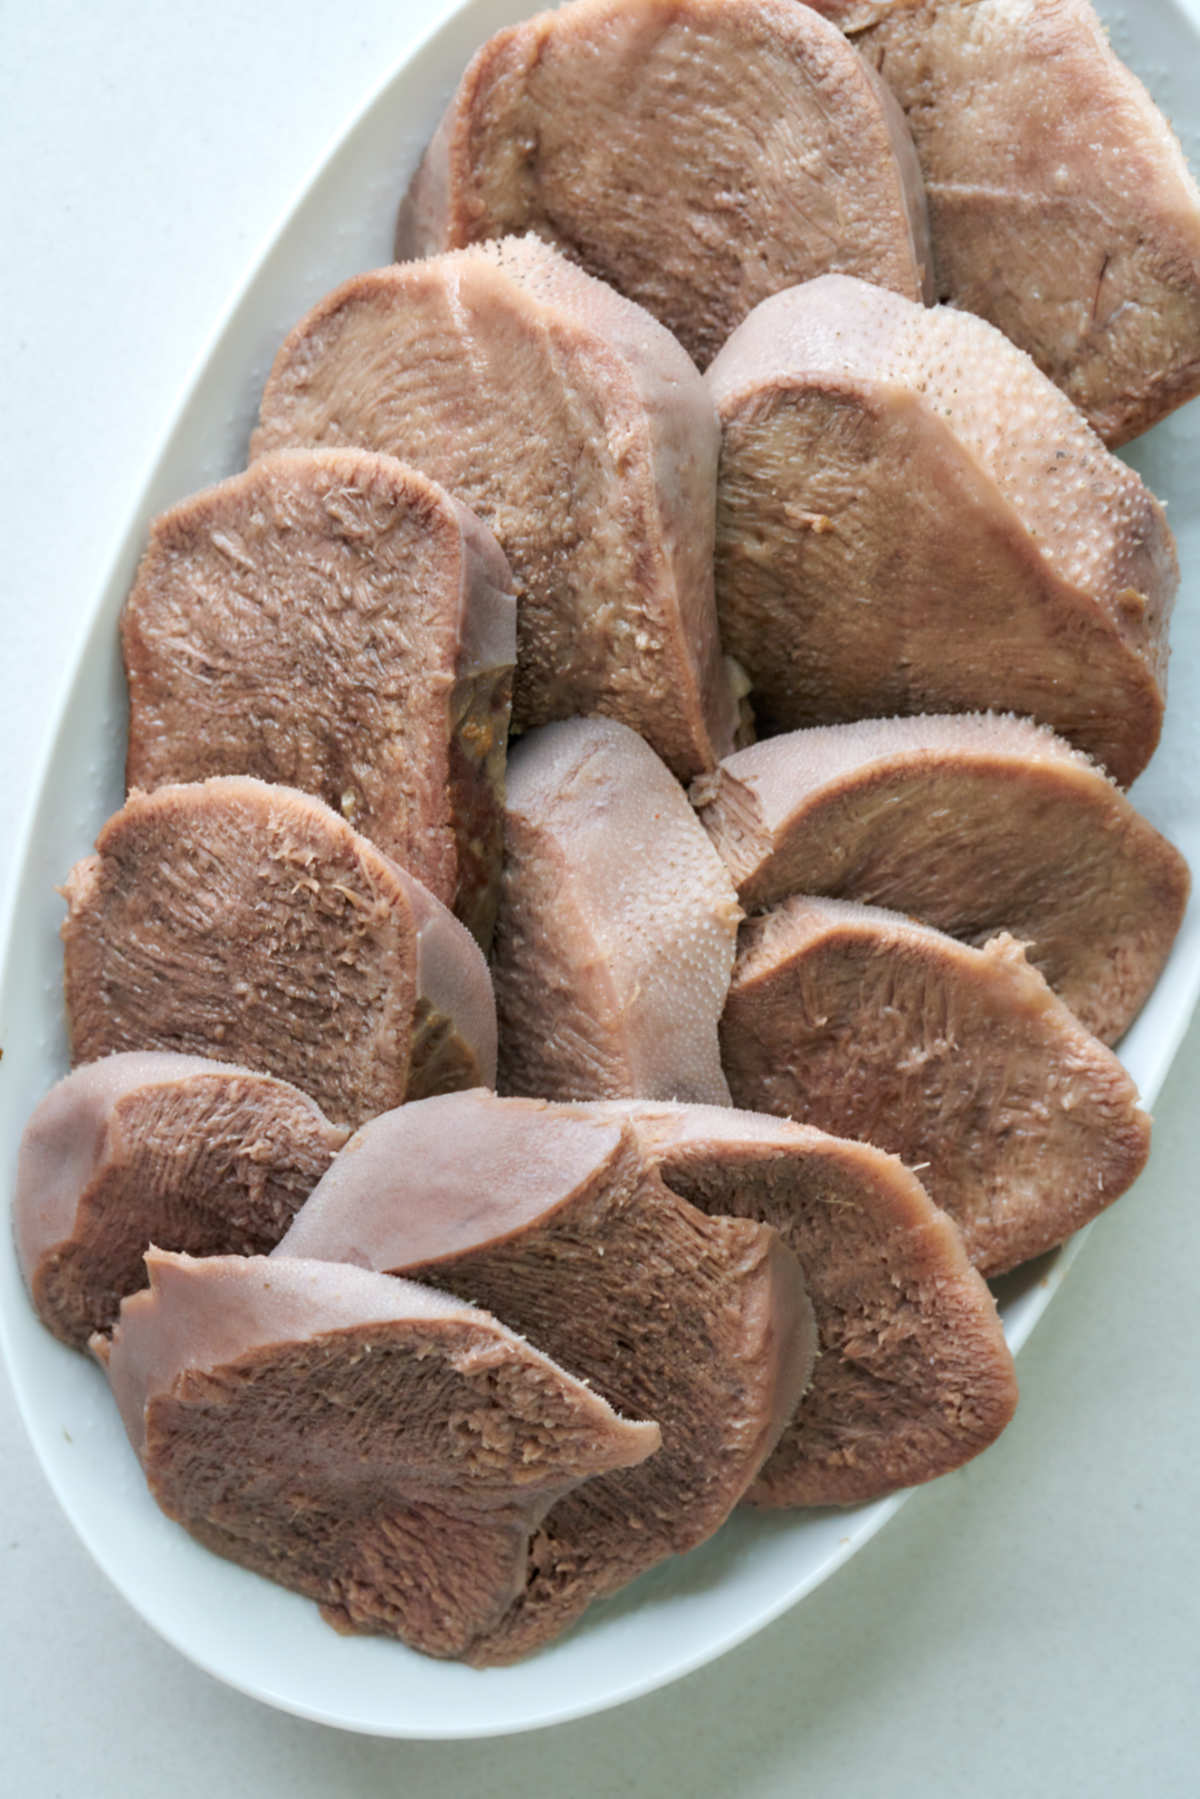 Top view of sliced cow tongue on a plate.